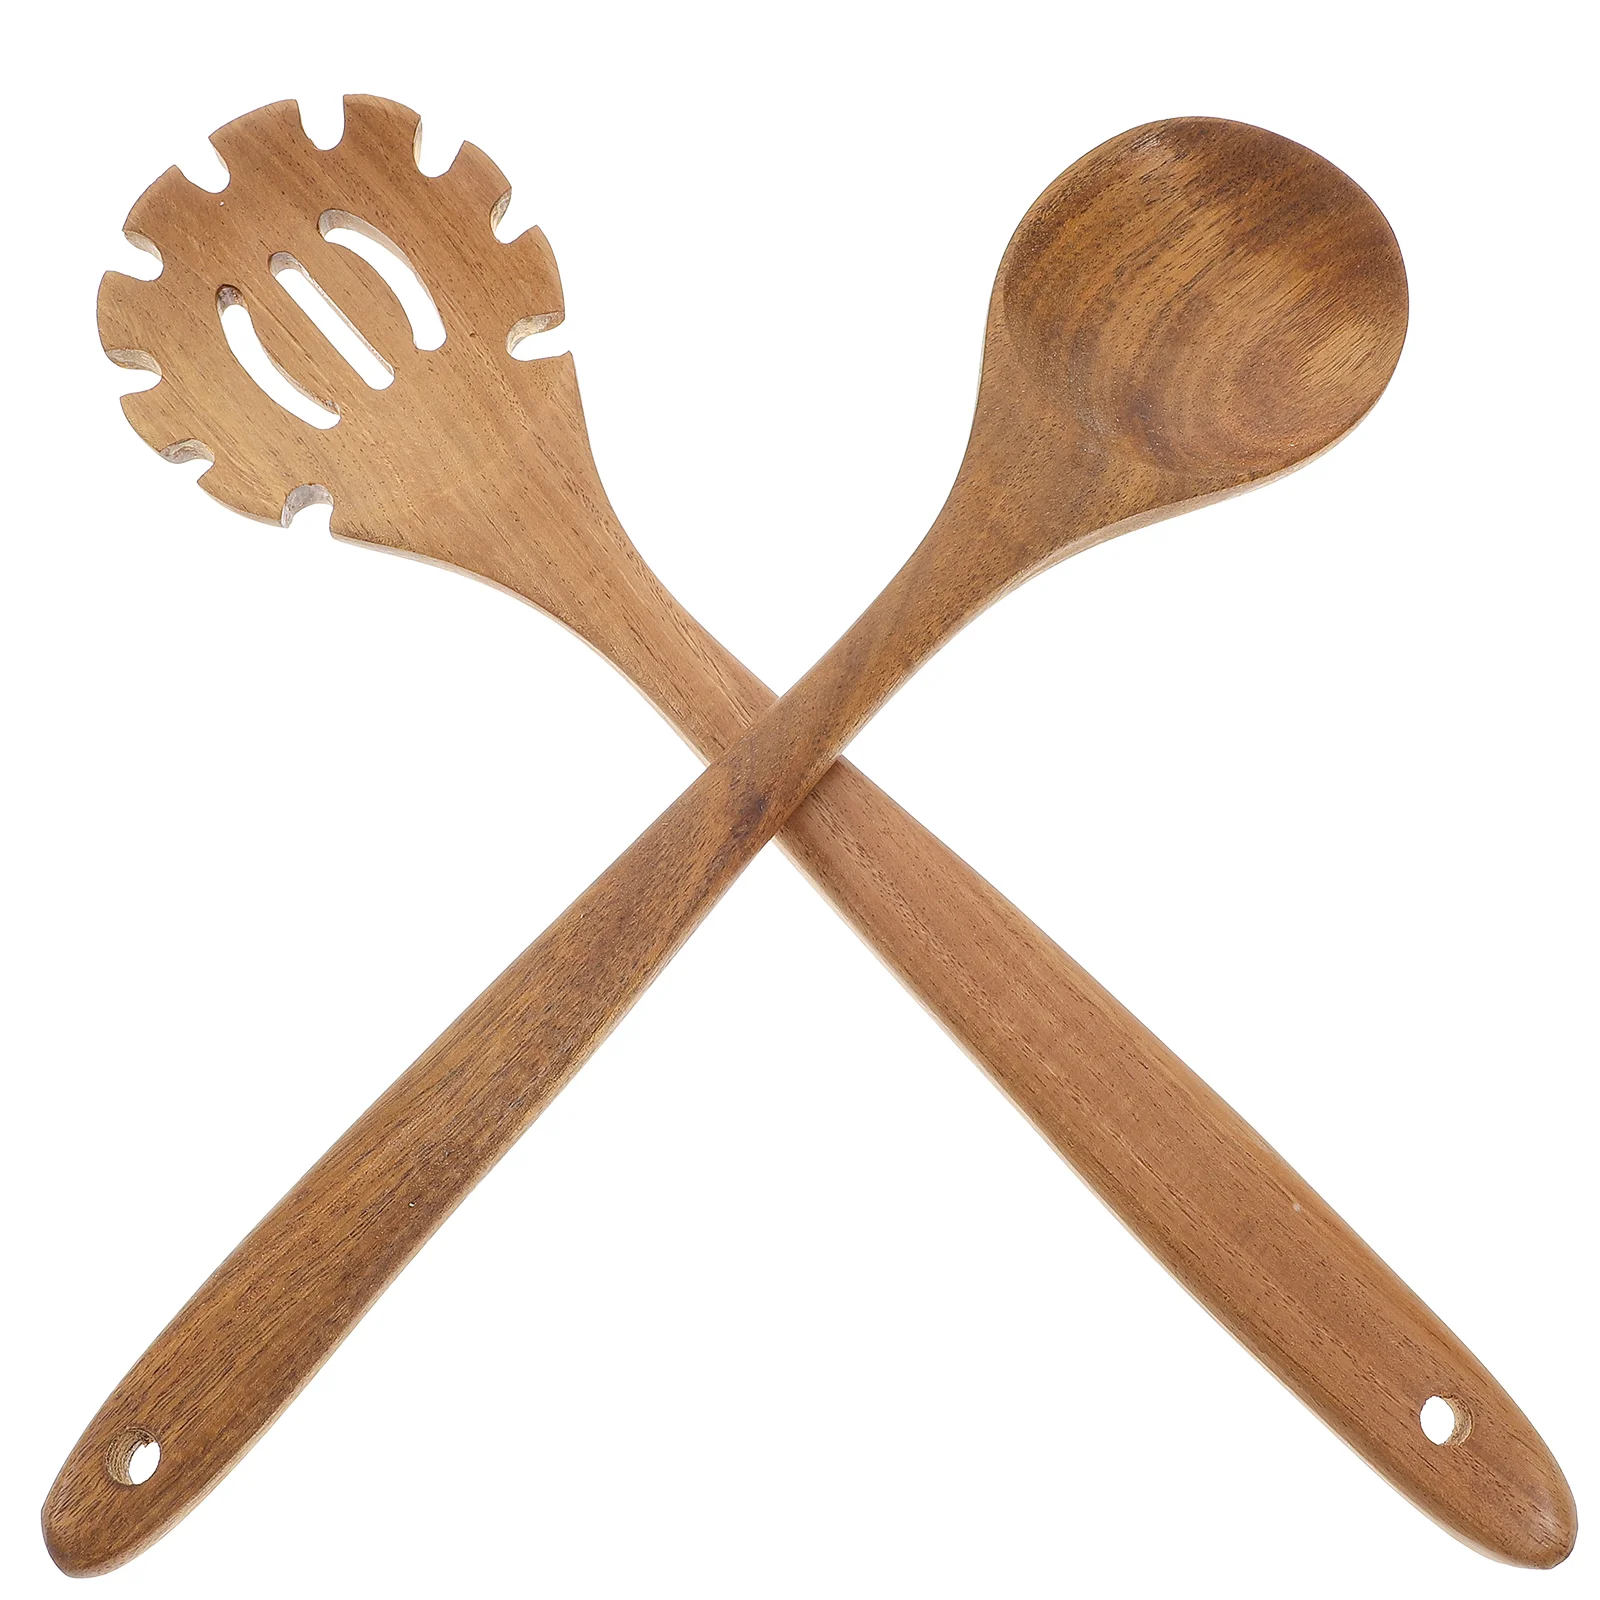 

Spoon Wooden Spaghetti Pasta Ladle Kitchen Server Soup Cooking Serving Spoons Noodles Fork Slotted Utensil Noodle Rice Mixing